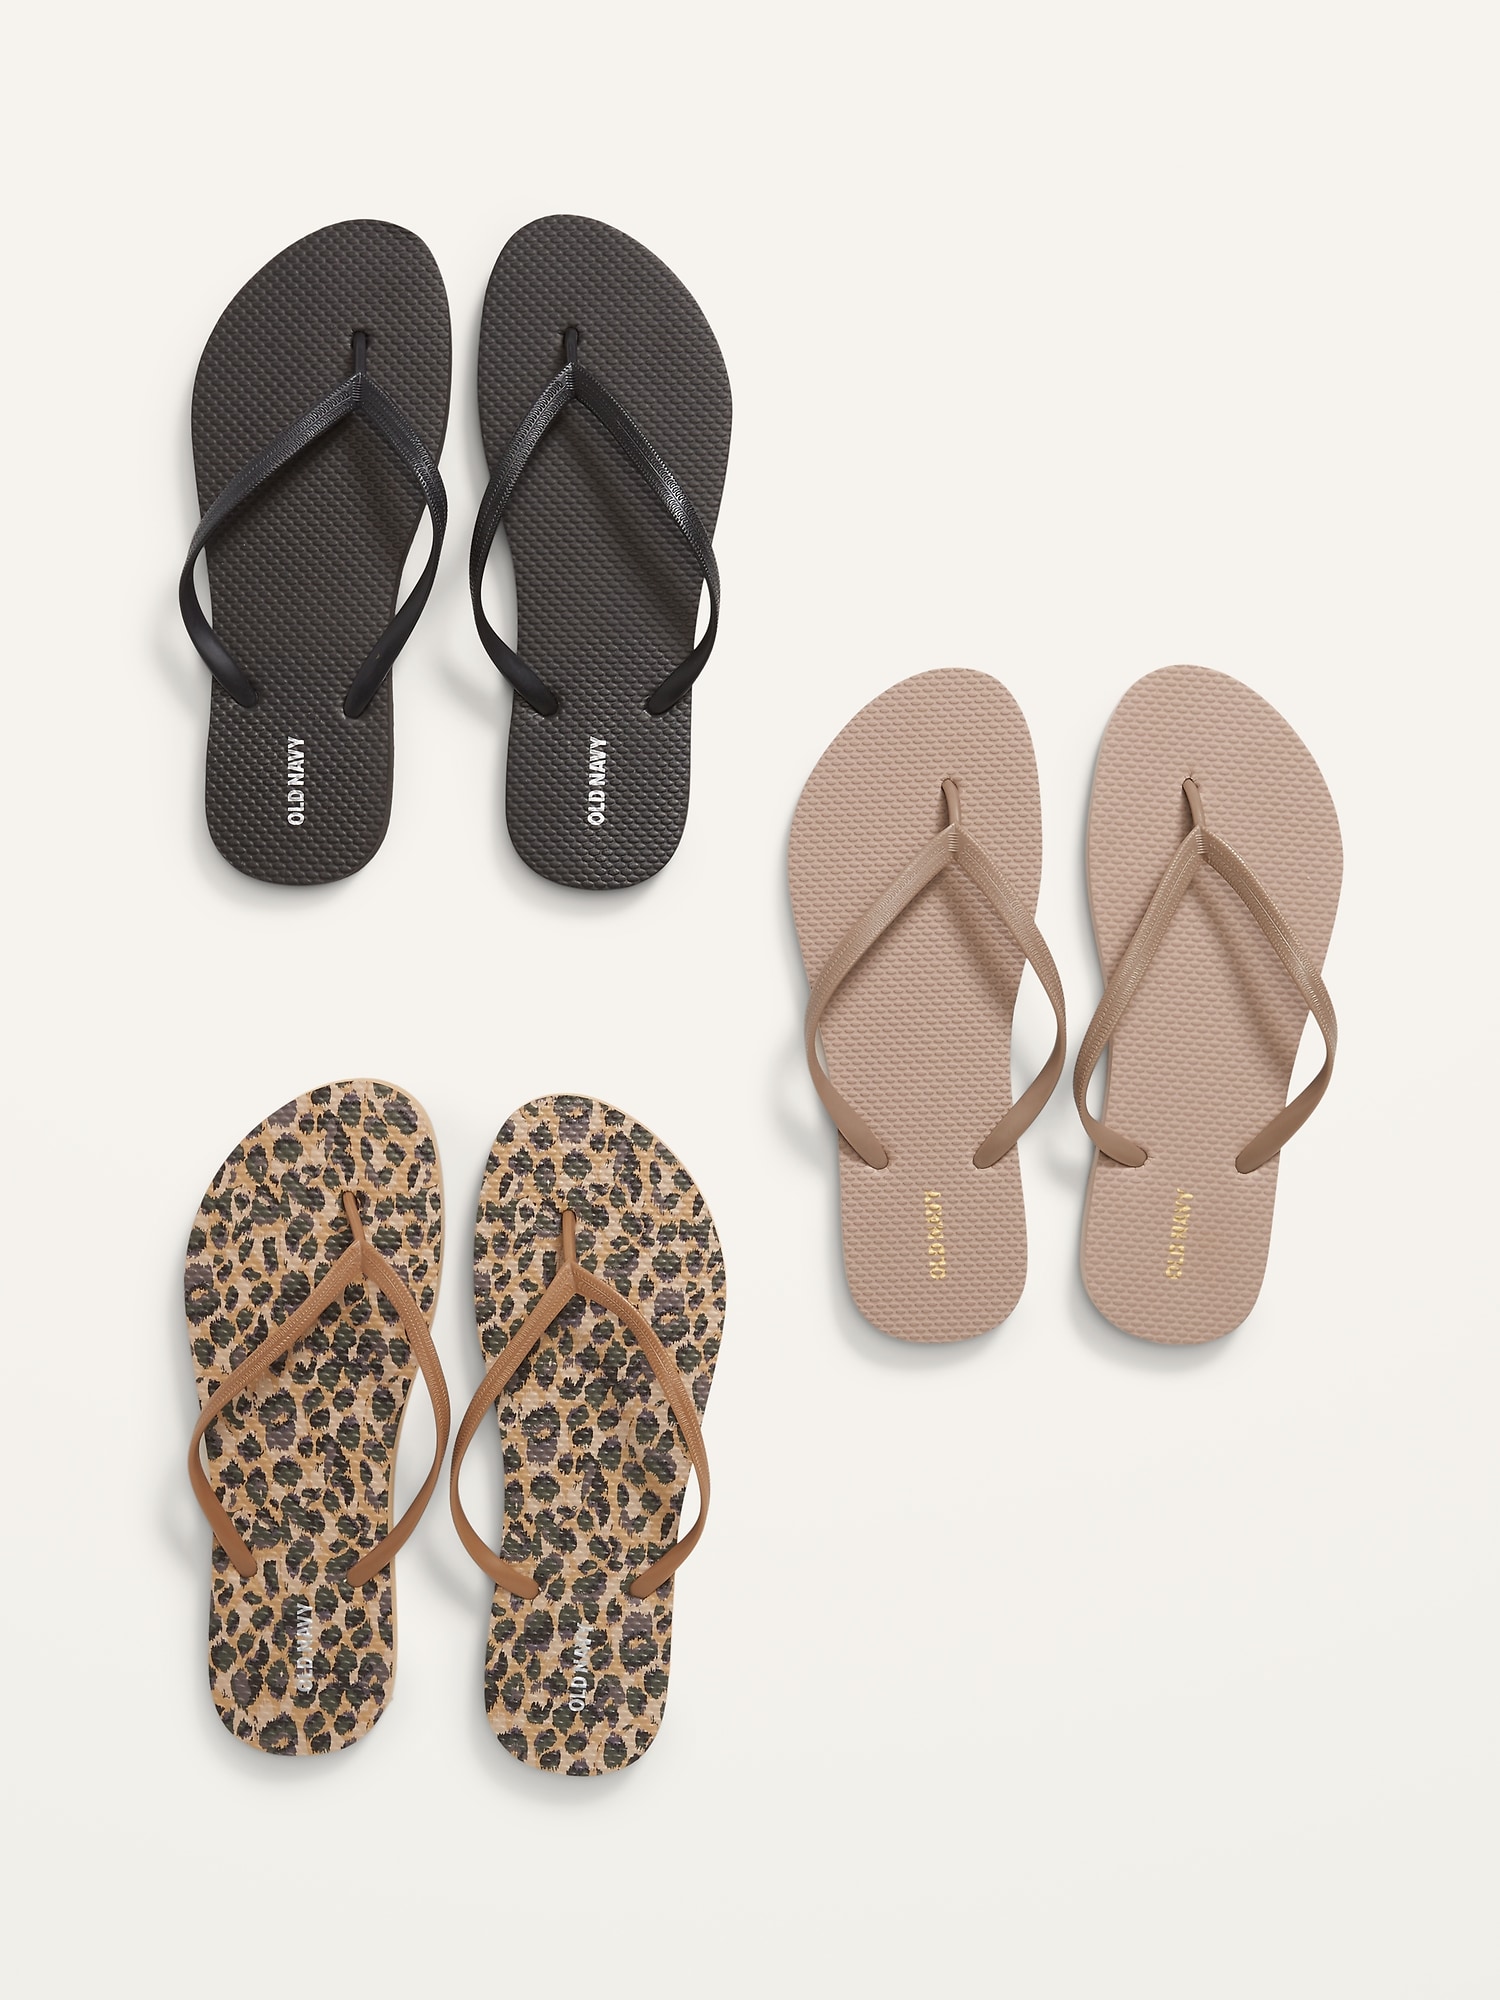 Old Navy Flip-Flop Sandals 3-Pack (Partially Plant-Based) brown. 1